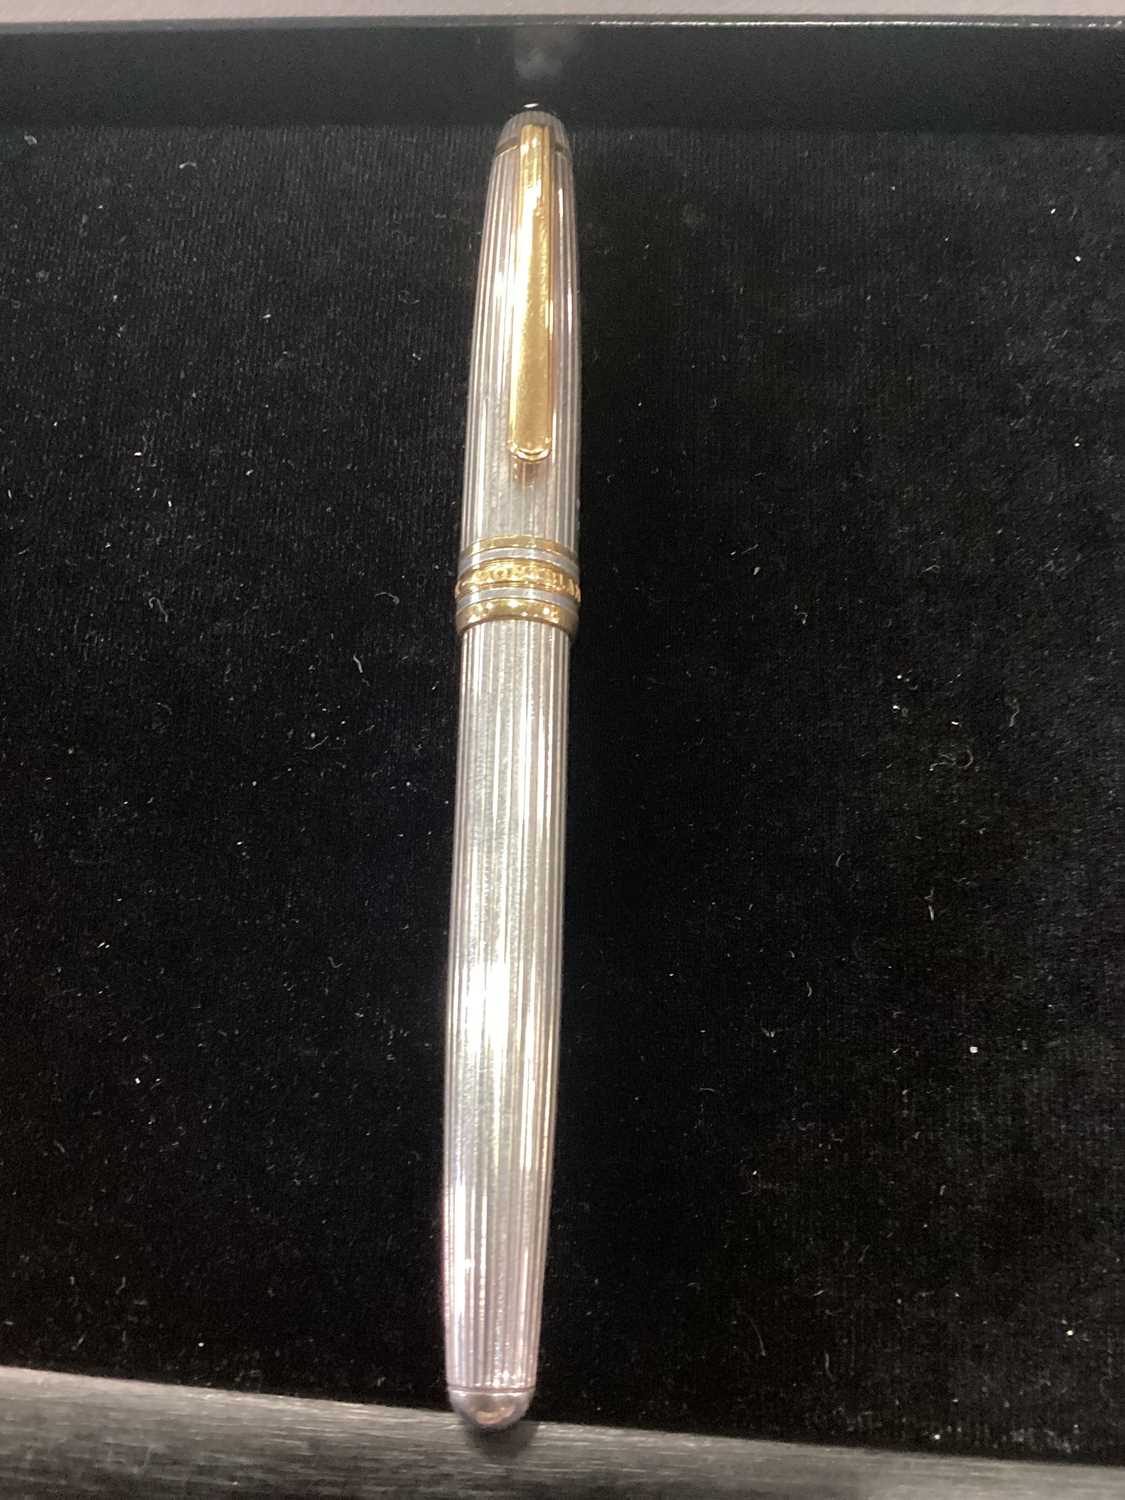 MONT BLANC, SILVER MEISTERSTUCK FOUNTAIN PEN - Image 3 of 8